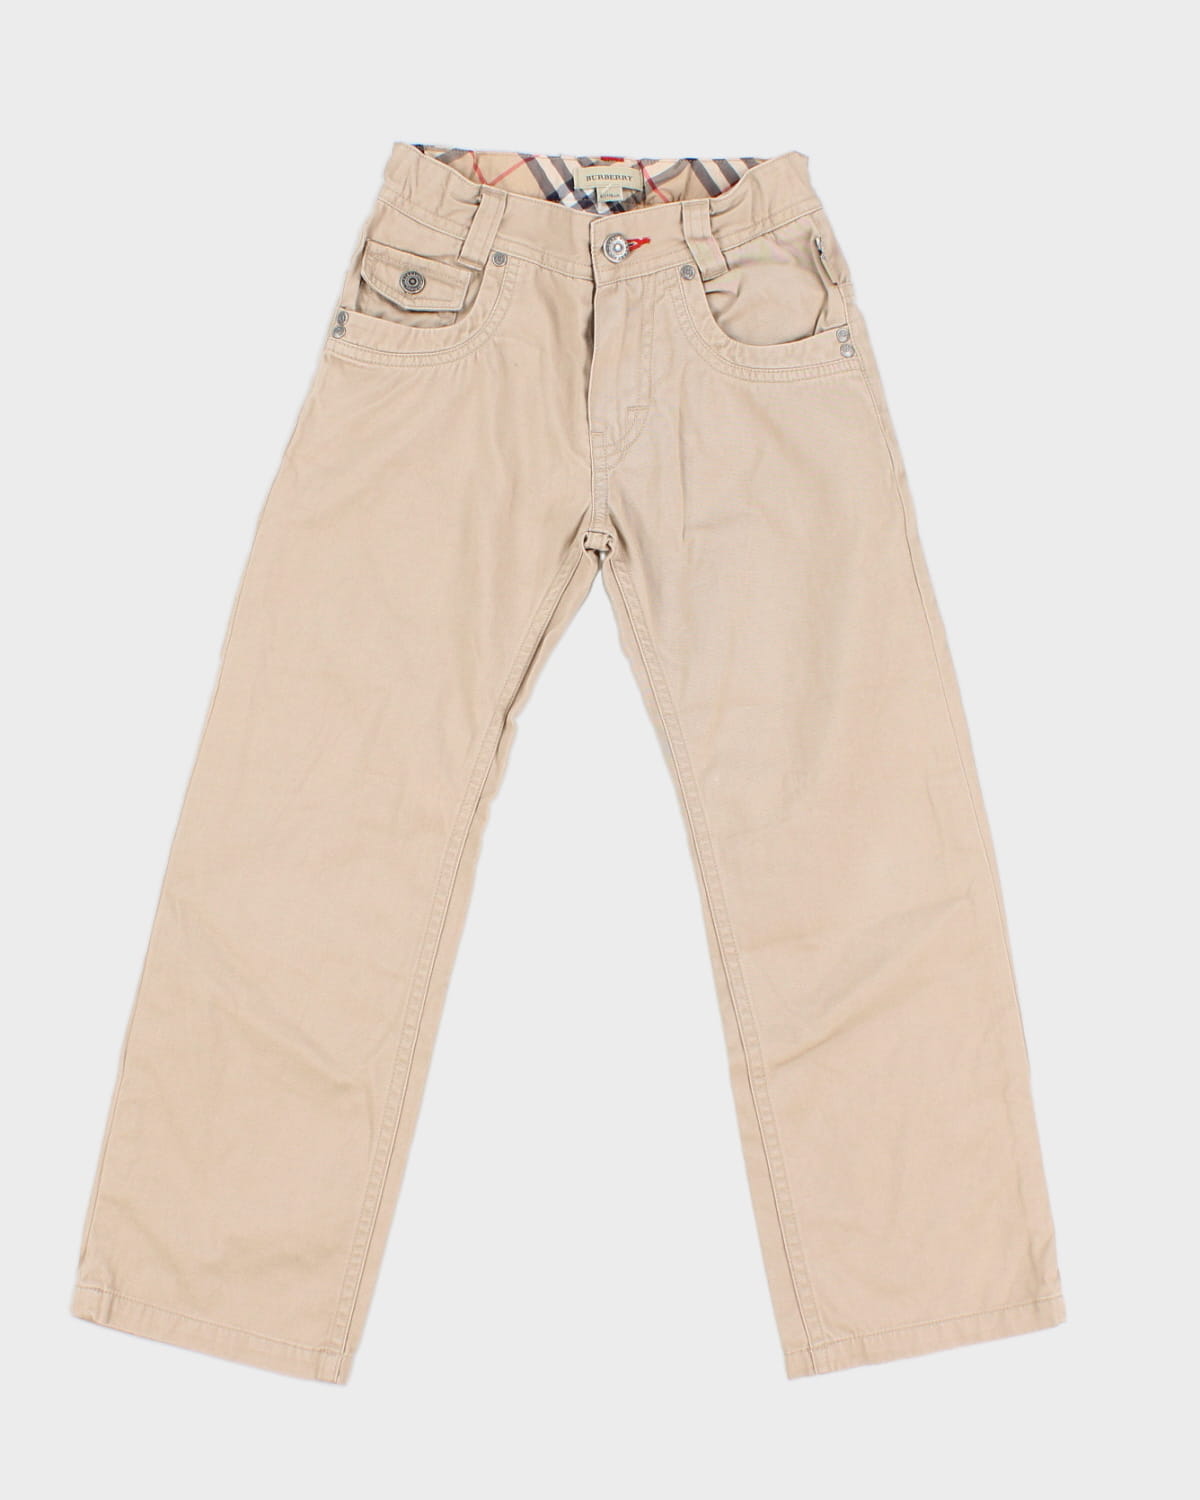 Children's Burberry Trousers - 6Y